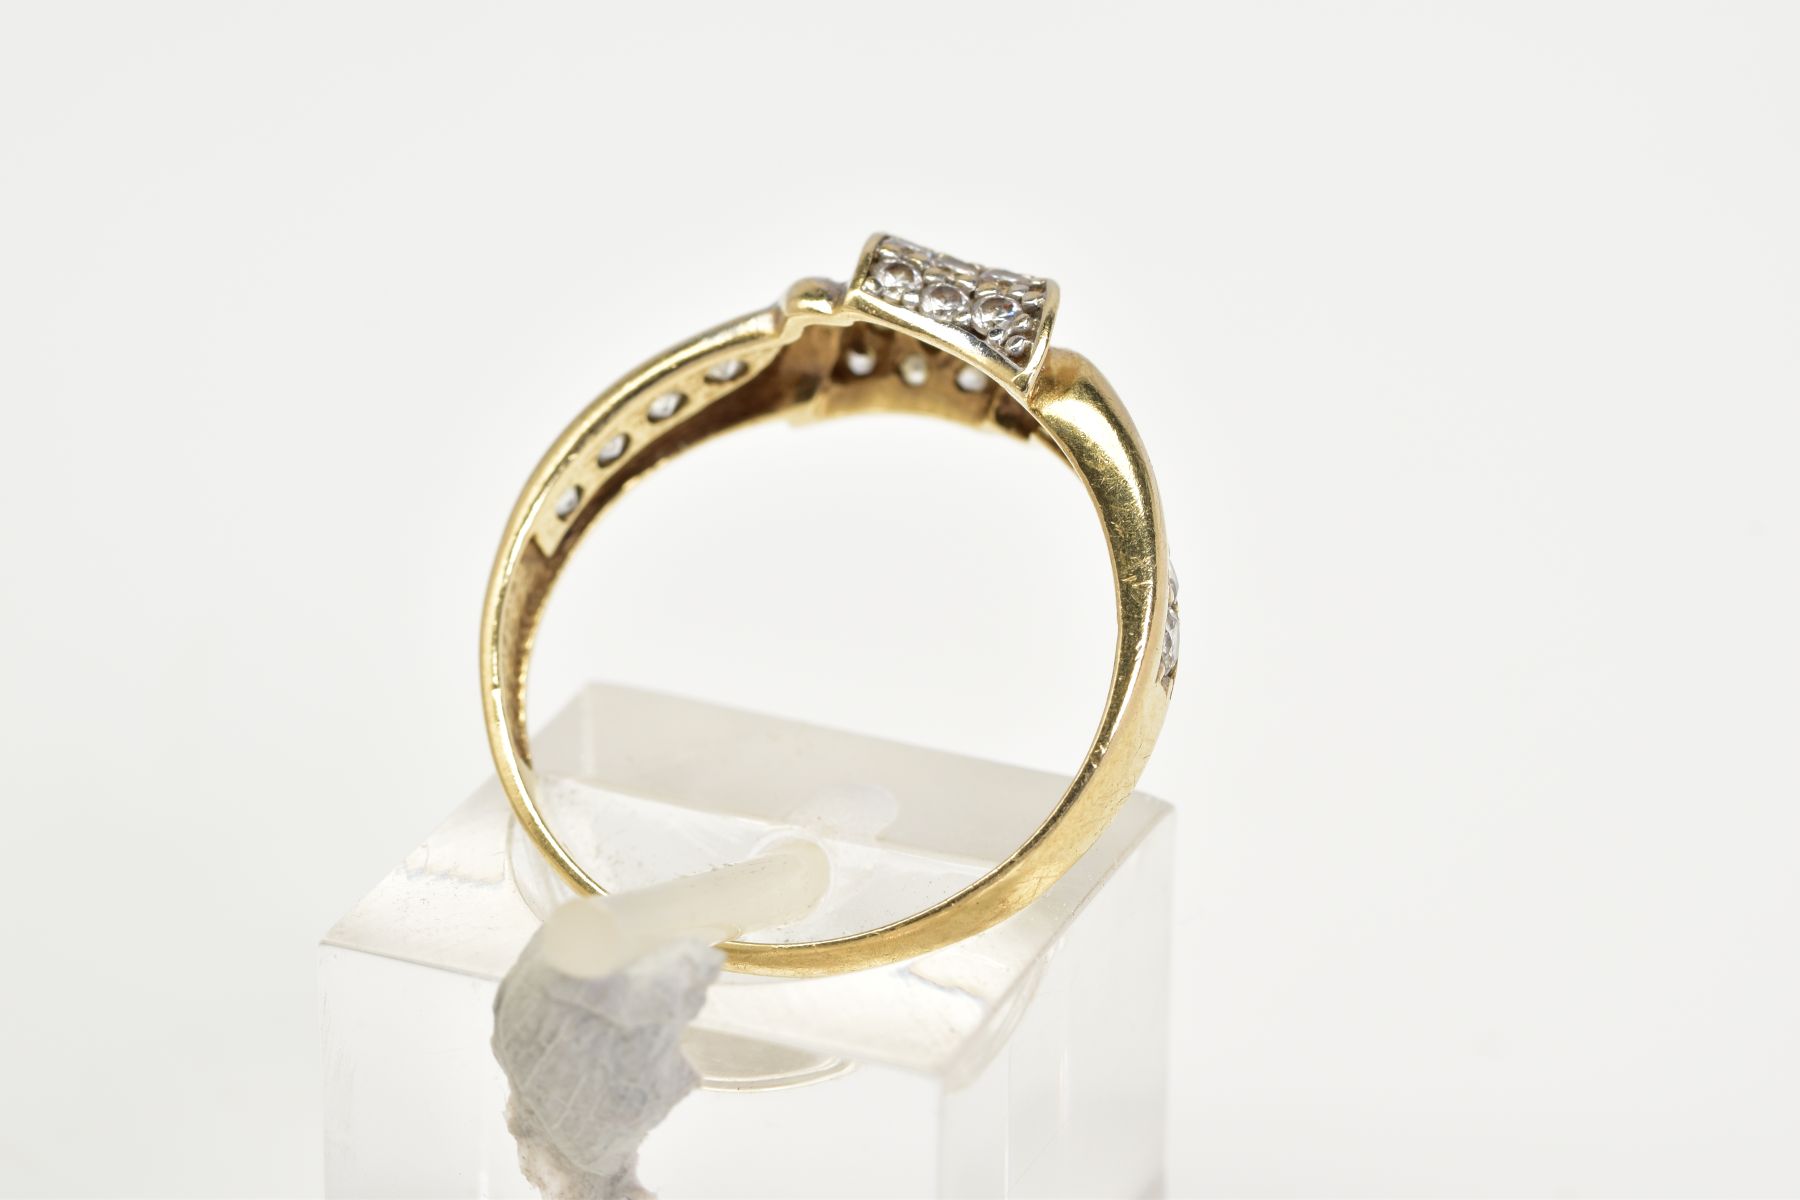 A 9CT GOLD DIAMOND RING, designed with an asymmetrical panel set with round brilliant cut - Image 3 of 3